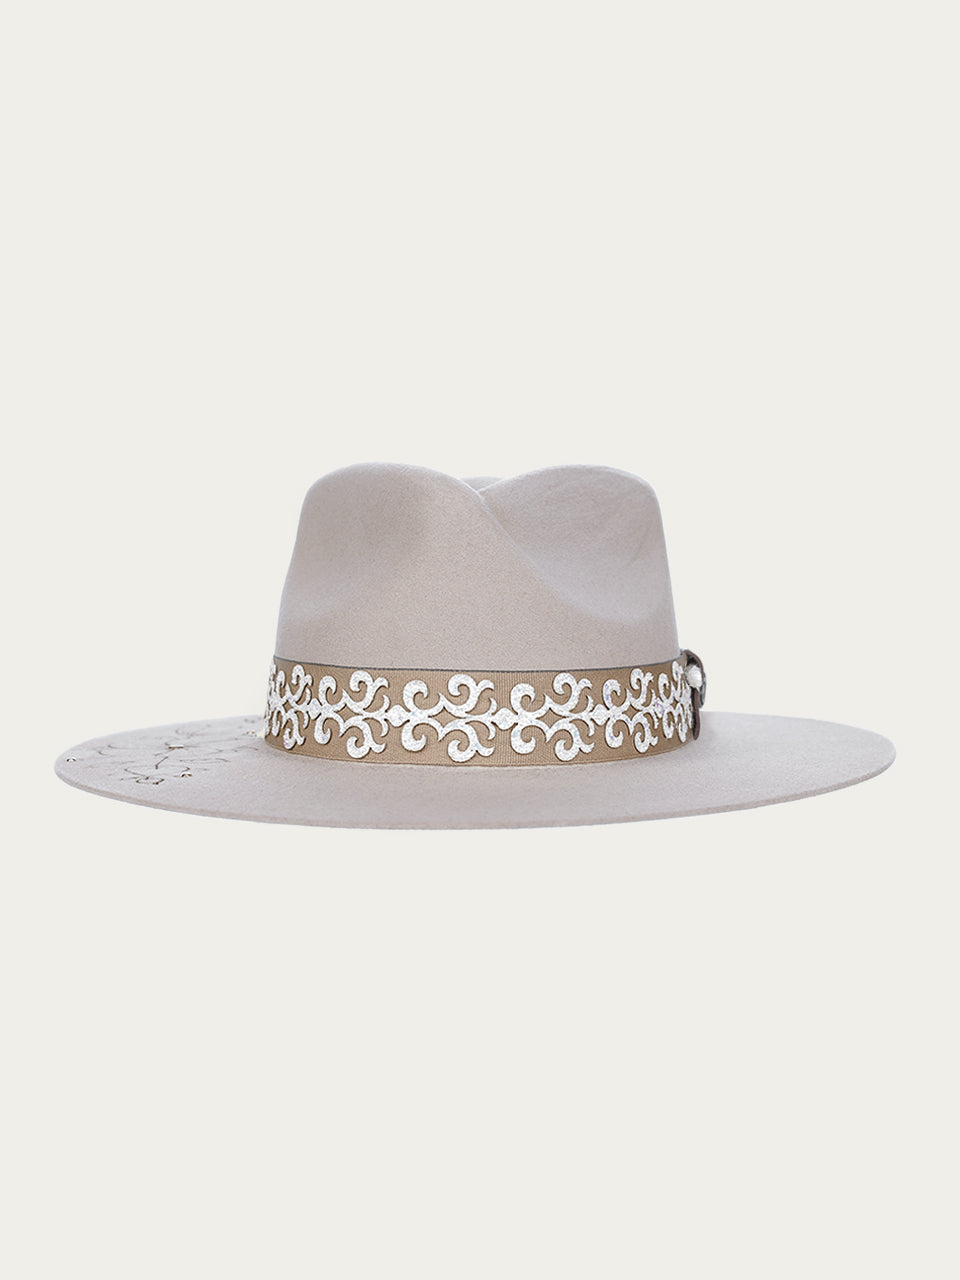 H0005 - TAN COWGIRL HAT WITH BROWN FLORAL EMBROIDERY GLITTERED OVERLAY HATBAND